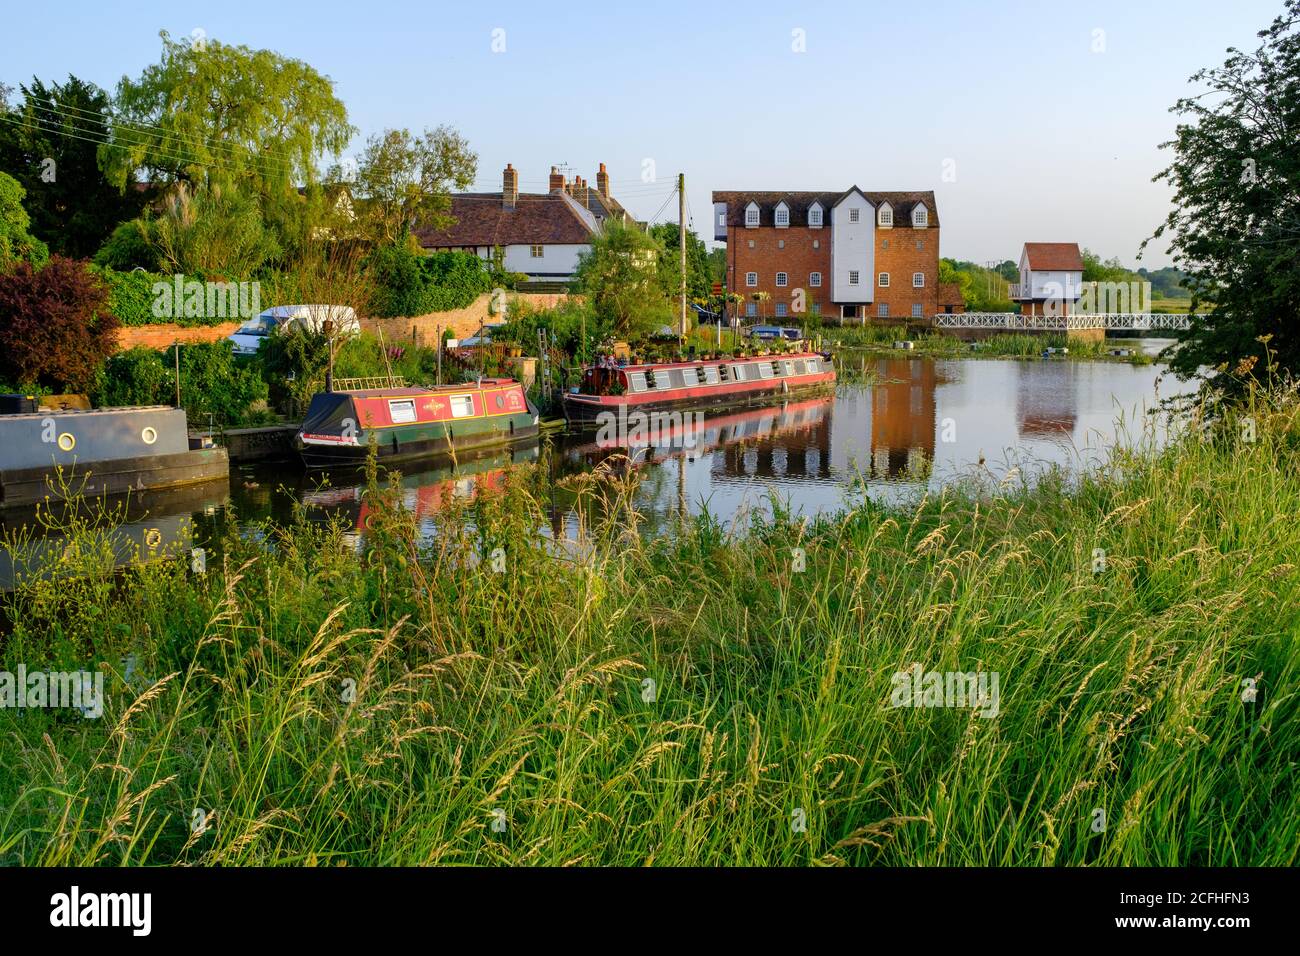 Canal boats (Narrowboats) on the River Avon on a mid-summer evening, Tewkesbury, England Stock Photo